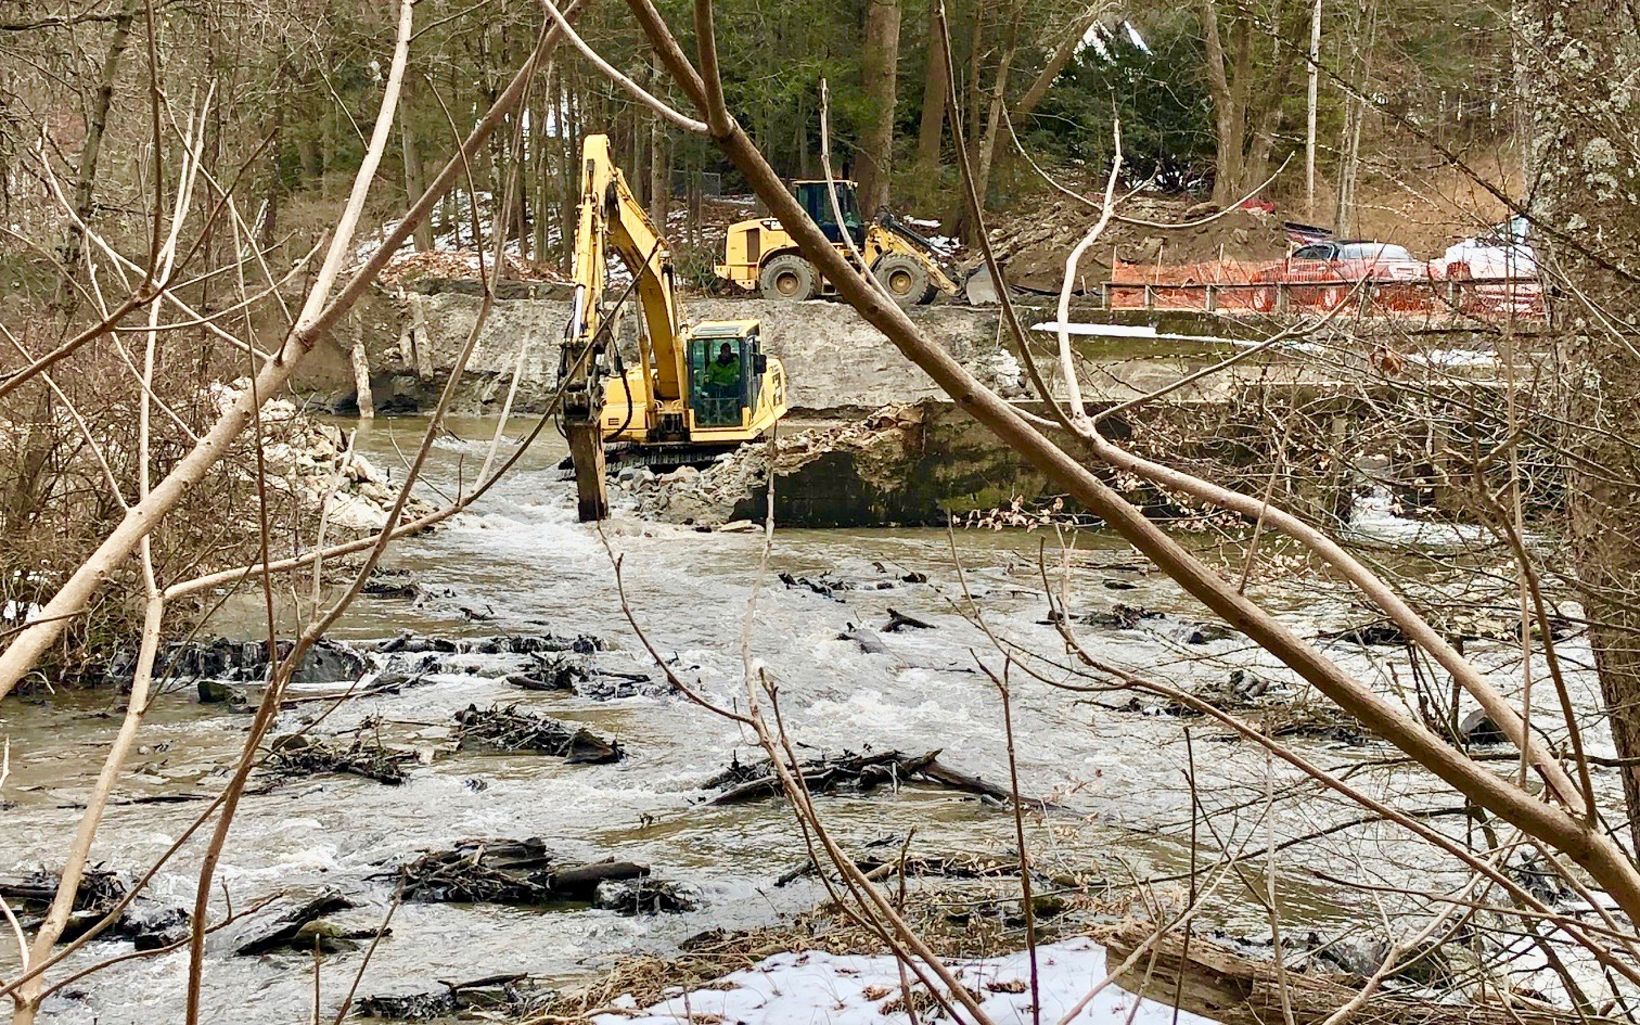 Looking upstream at progress being made on the removal of the Old Papermill Dam.